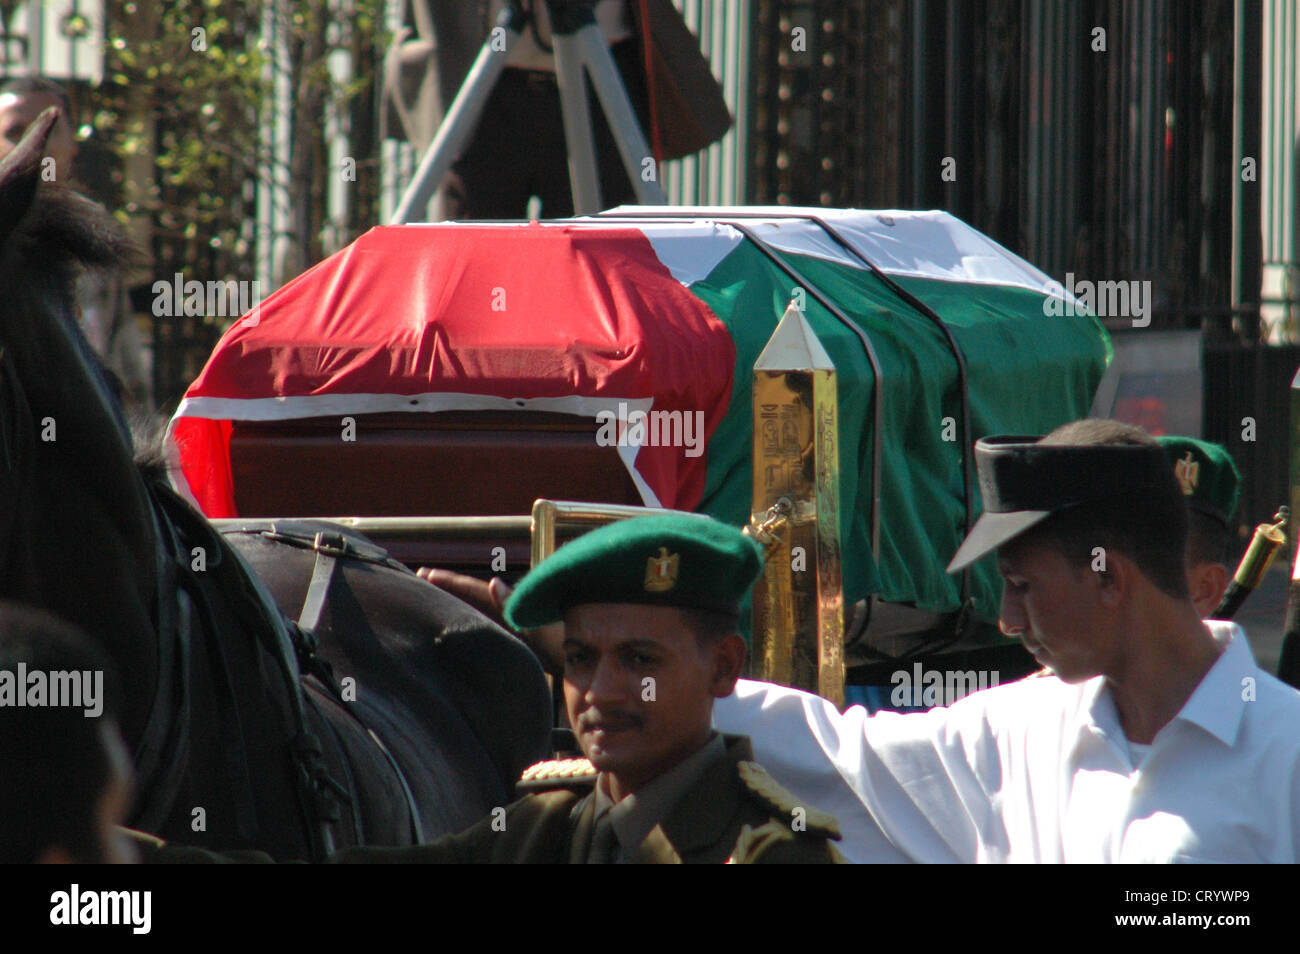 2004 - The casket of Palestinian leader Yasser Arafat in the state funeral hosted by Egyptian President Hosni Mubarak in Cairo. Stock Photo